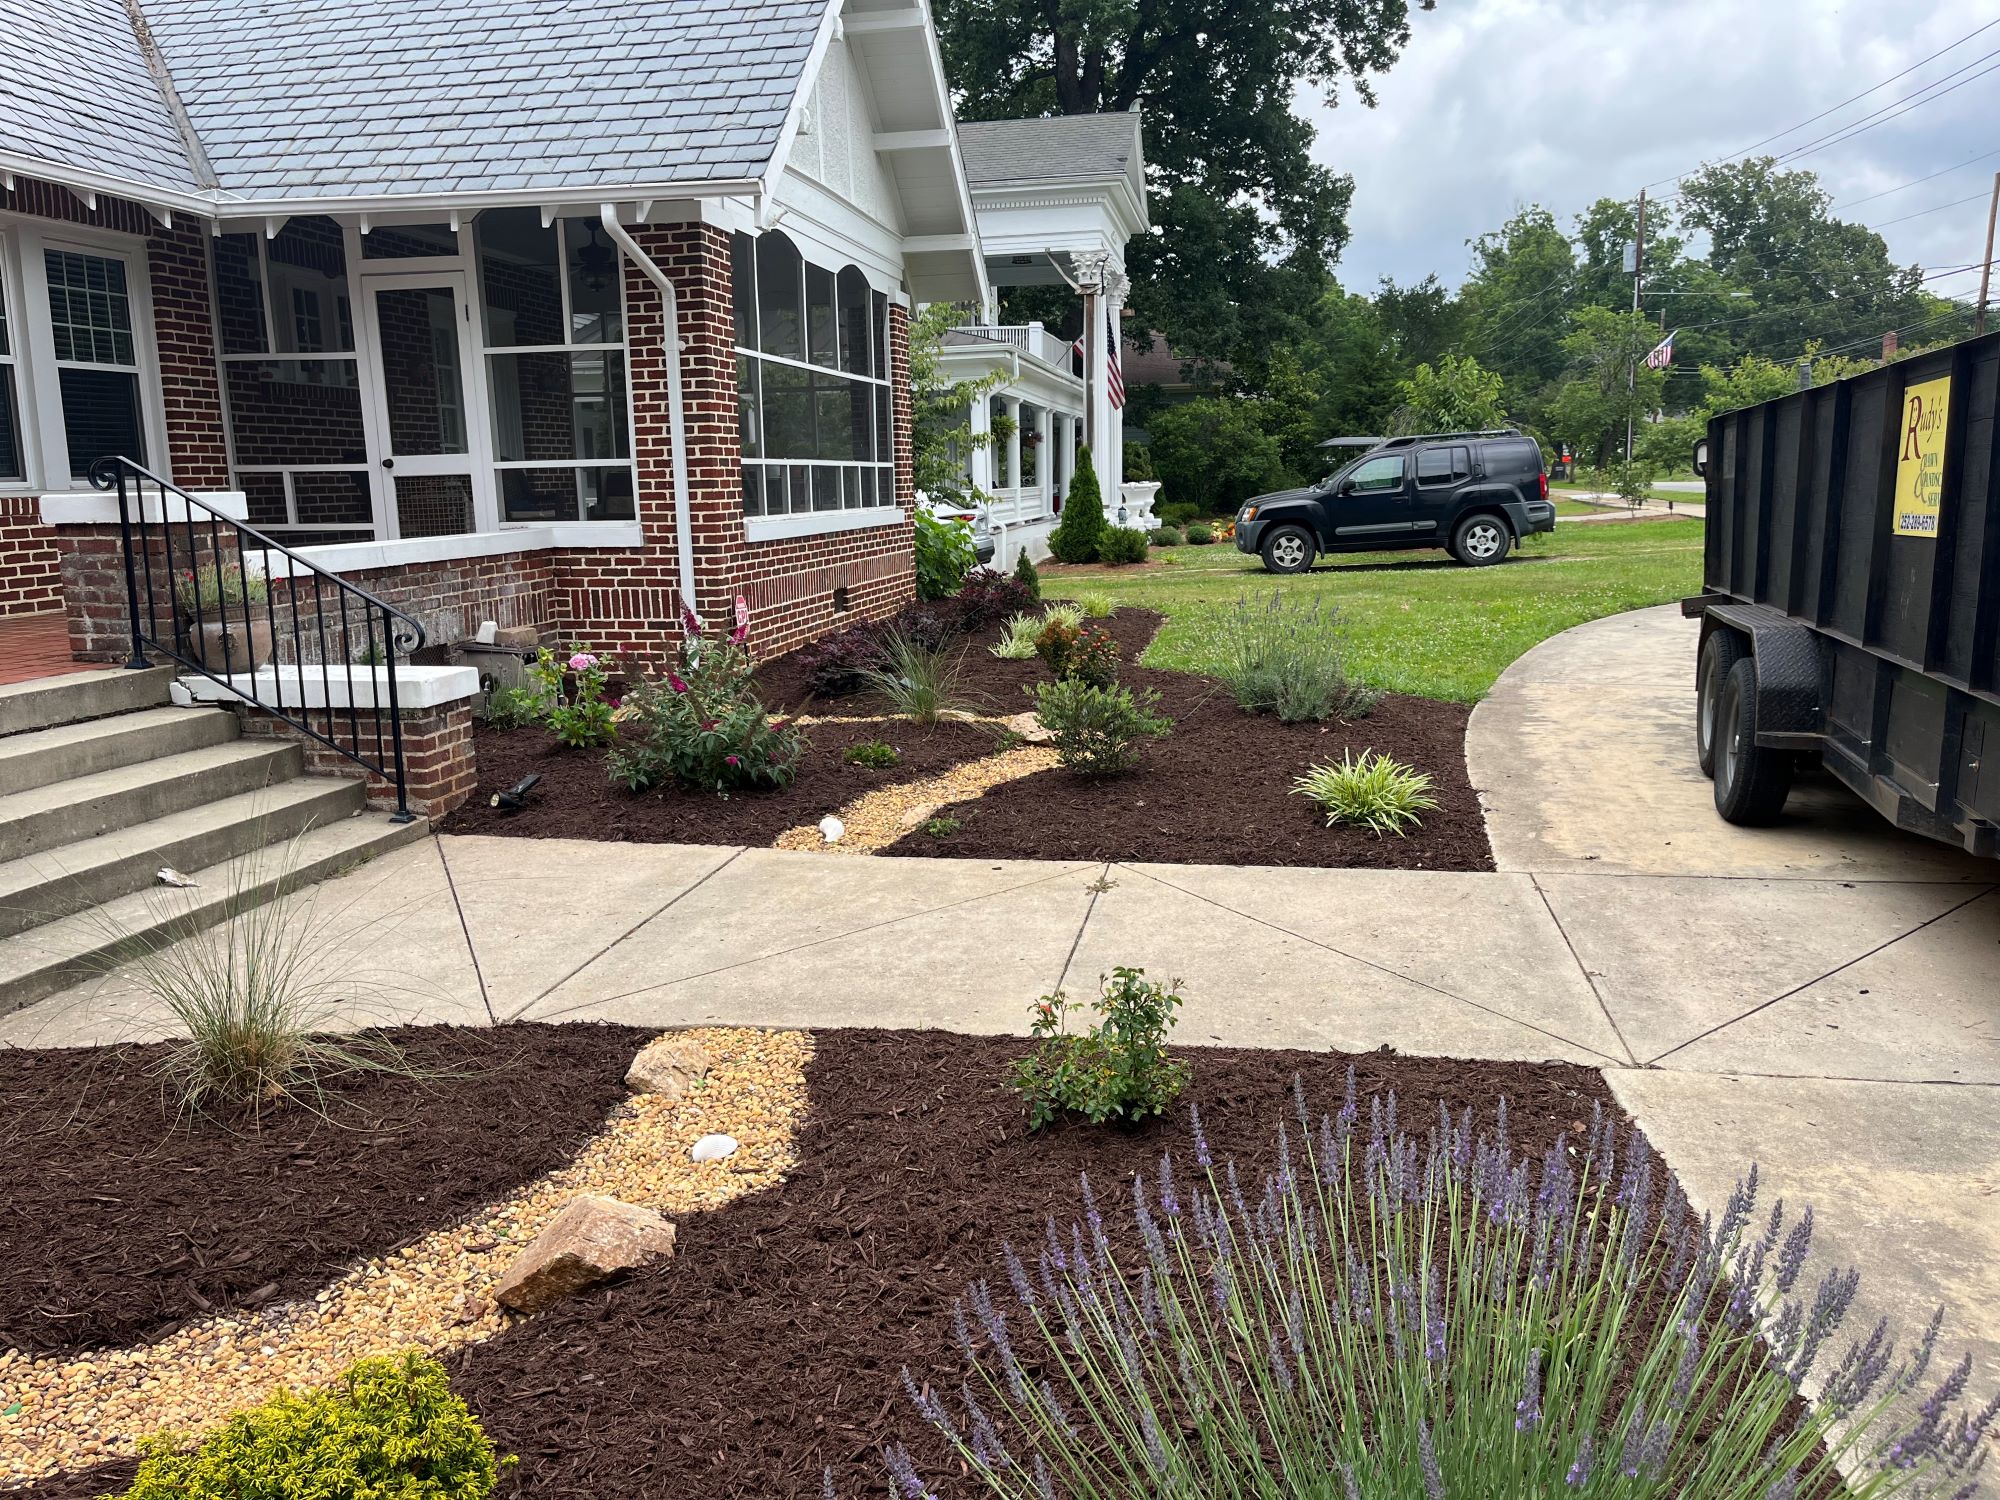 If you're searching for a reliable "landscaper near me" in Middlesex, NC, look no further than Rudy's Lawn & Landscape. We're your local landscaping experts, ready to enhance your outdoor space.